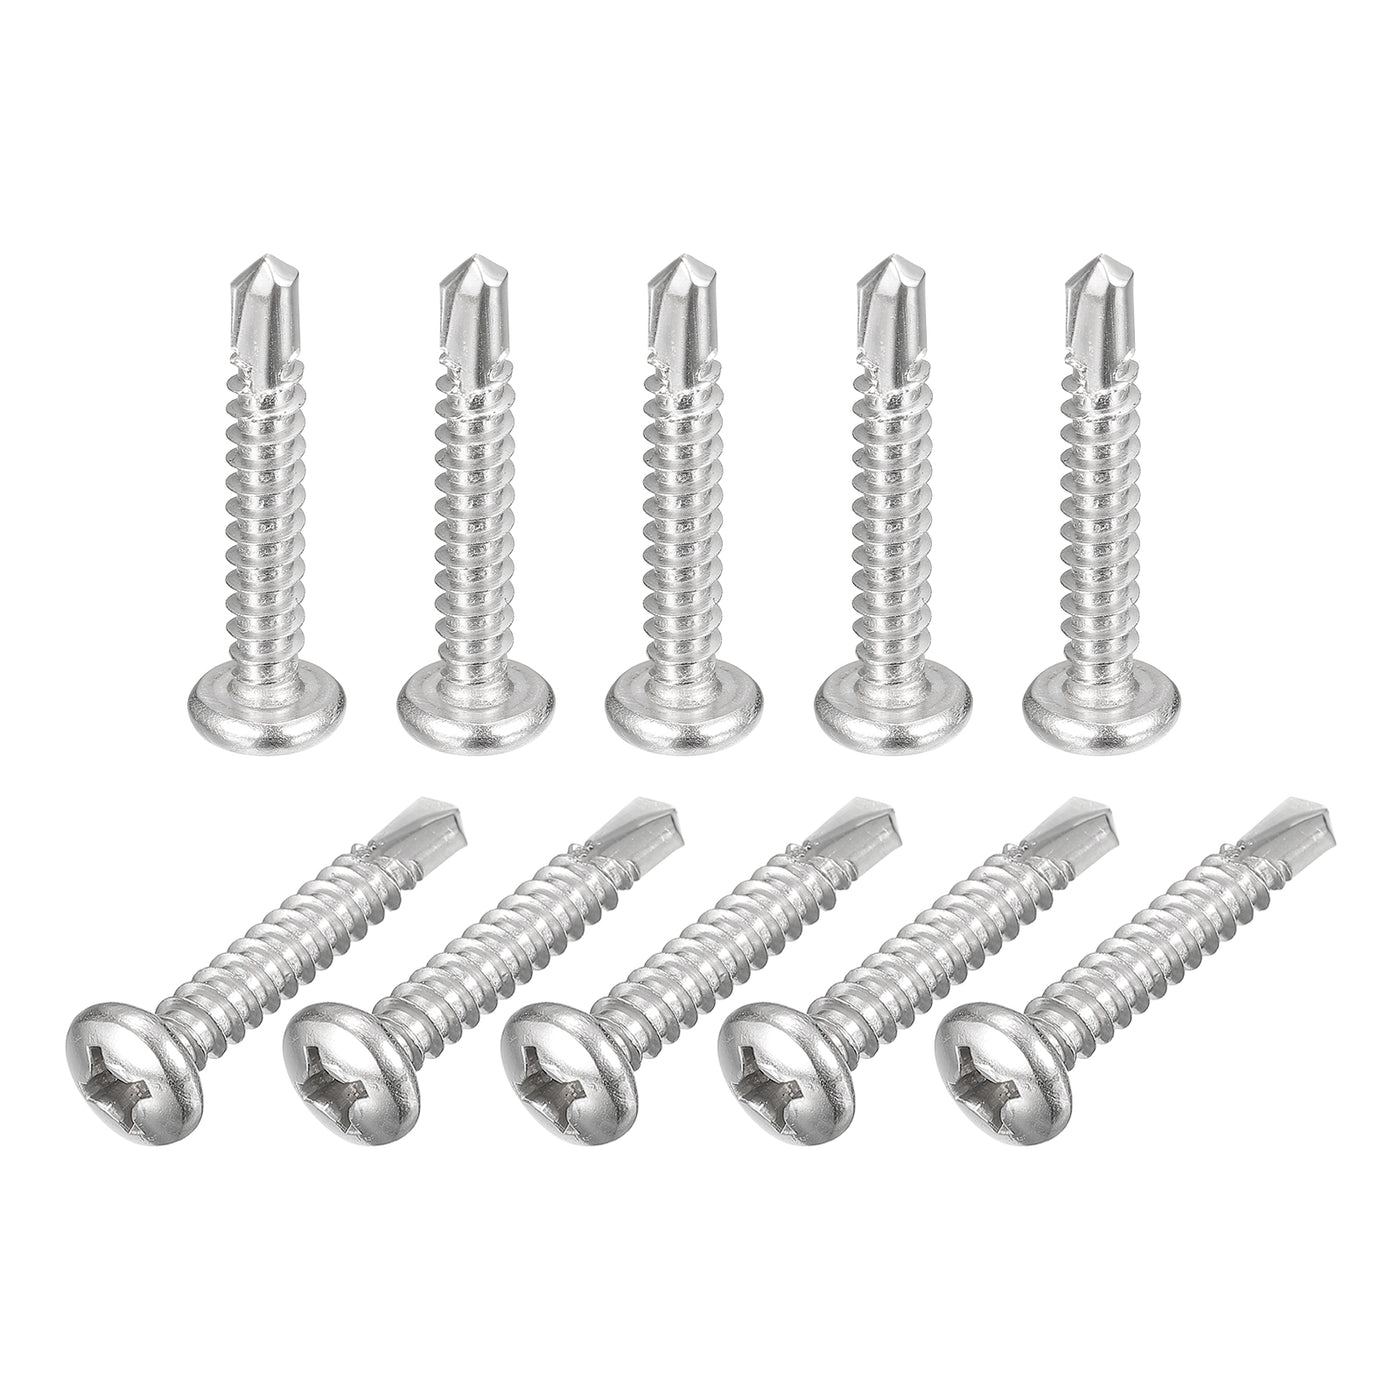 uxcell Uxcell #12 x 1-1/4" Self Drilling Screws, 20pcs Phillips Pan Head Self Tapping Screws